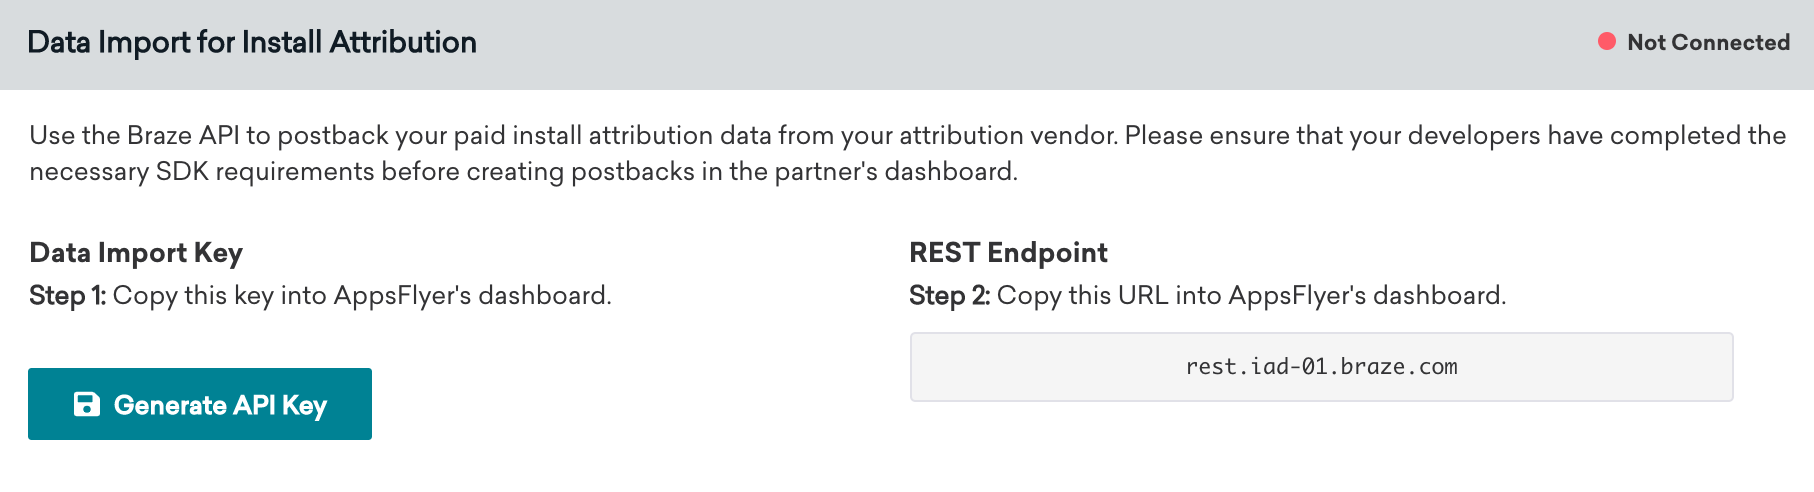 The "Data Import for Install Attribution" box available on the AppsFlyer Technology page. Included in this box is the data import key and the REST endpoint.